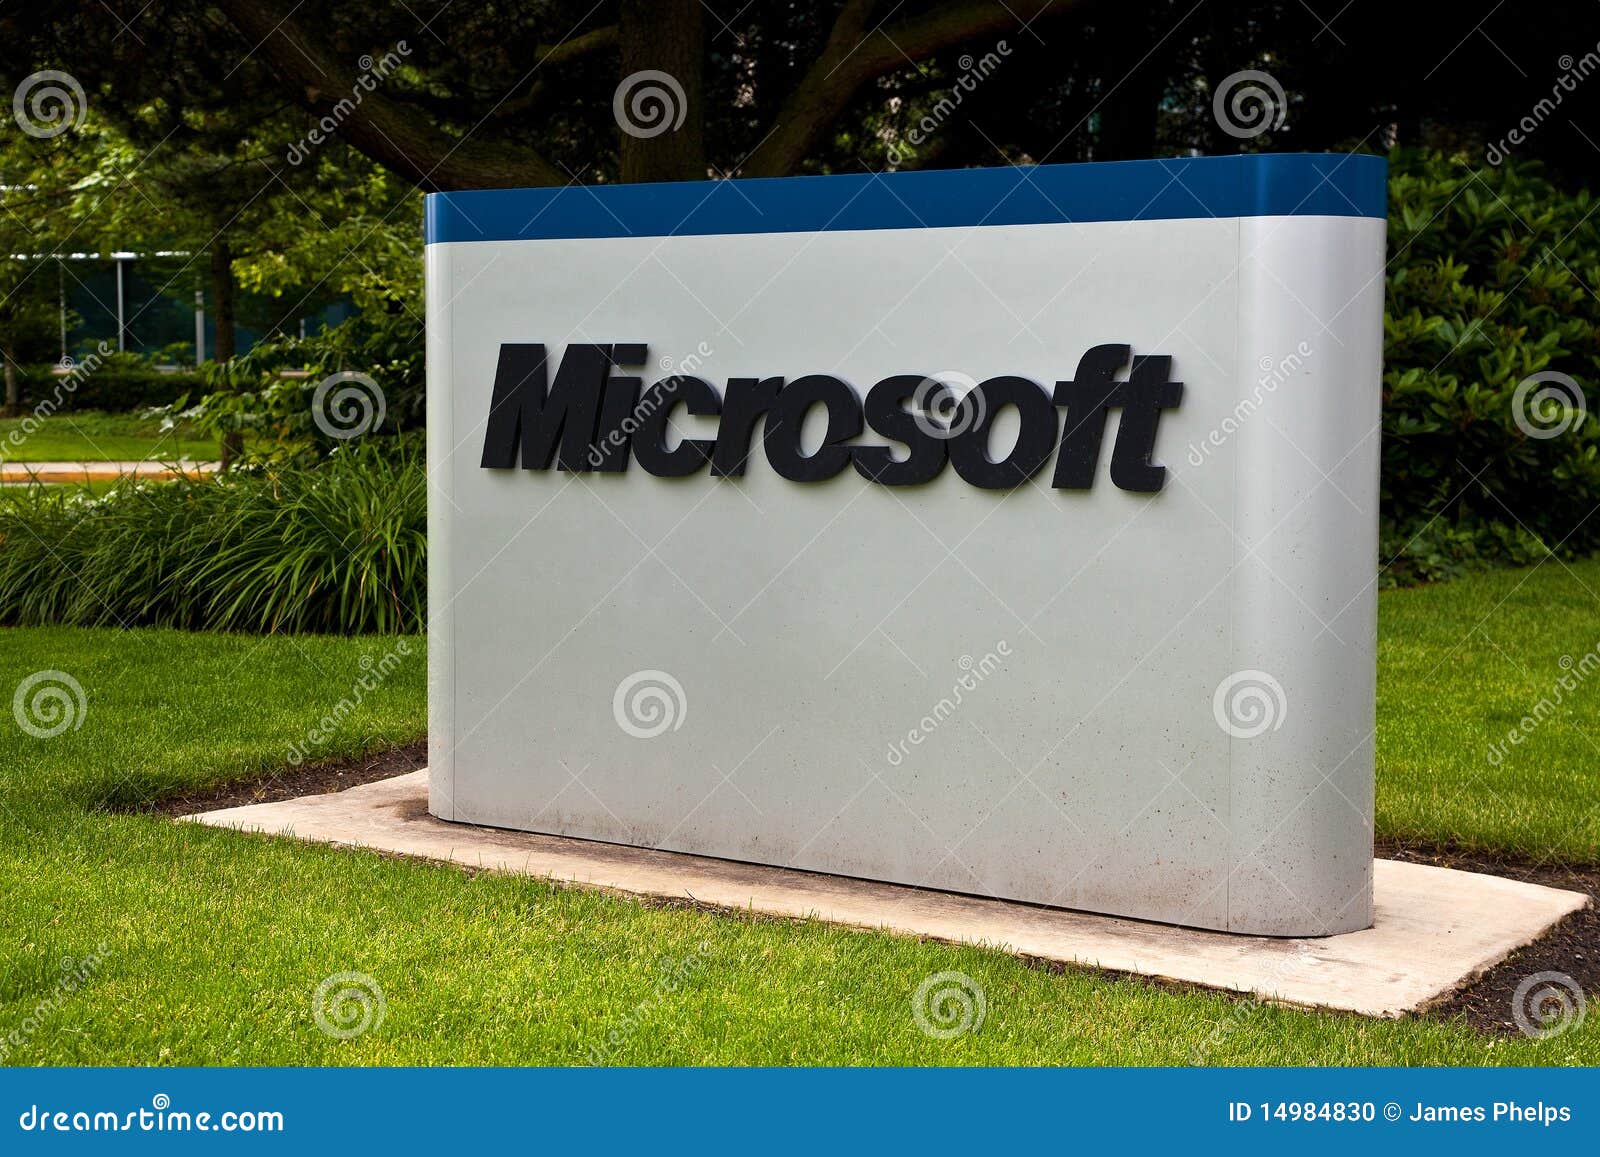 microsoft clipart discontinued - photo #36